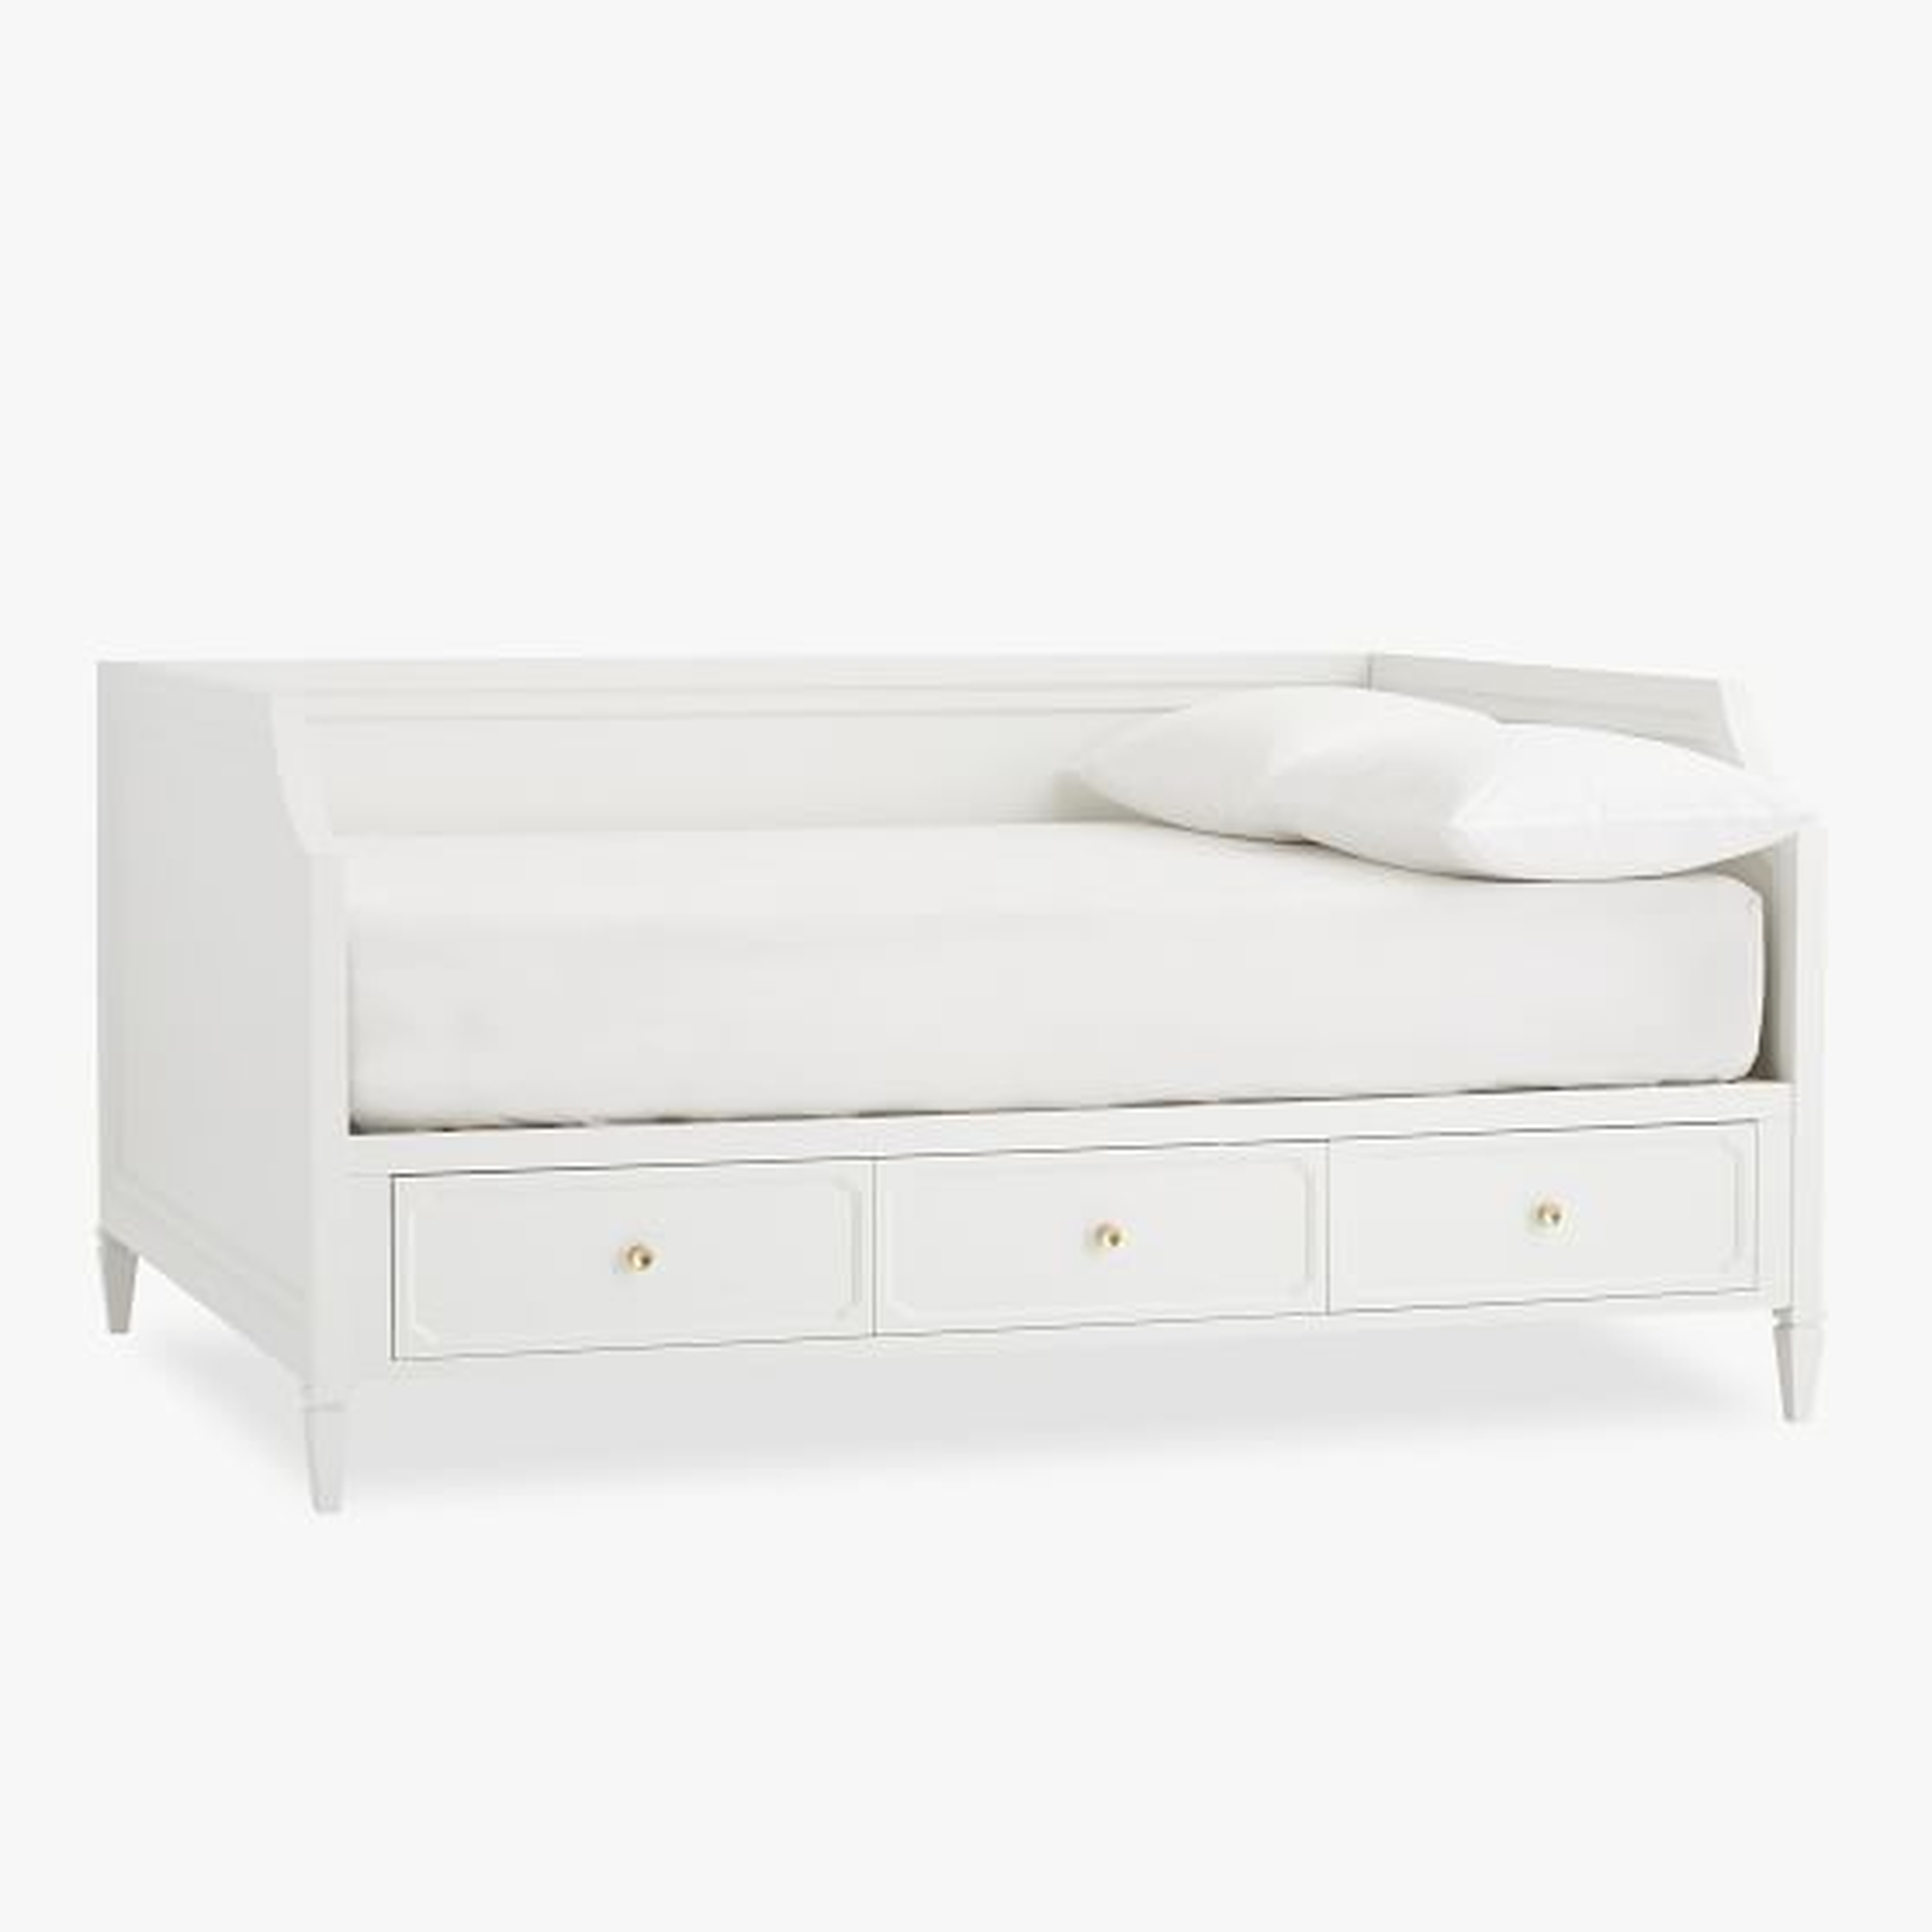 Auburn Storage Daybed, Full, Simply White, In-Home - Pottery Barn Kids